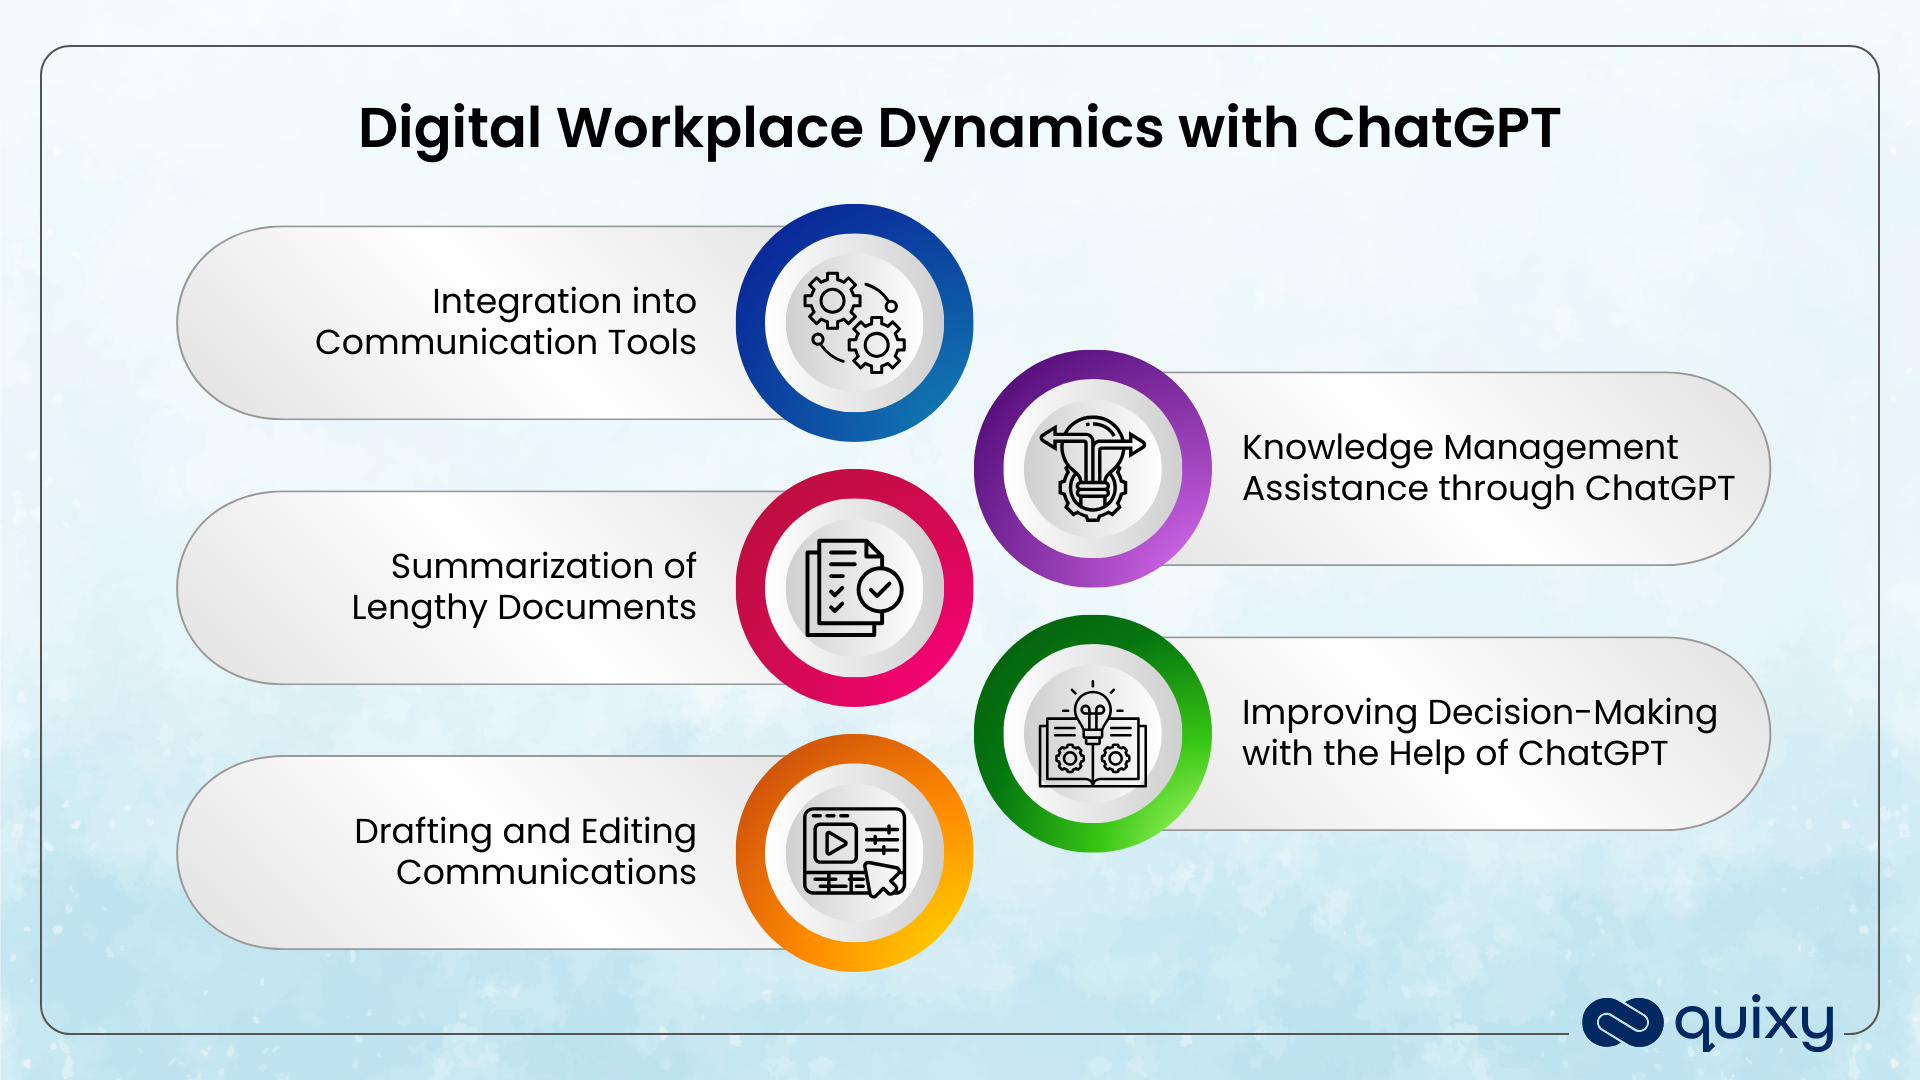 Digital Workplace Dynamics with ChatGPT